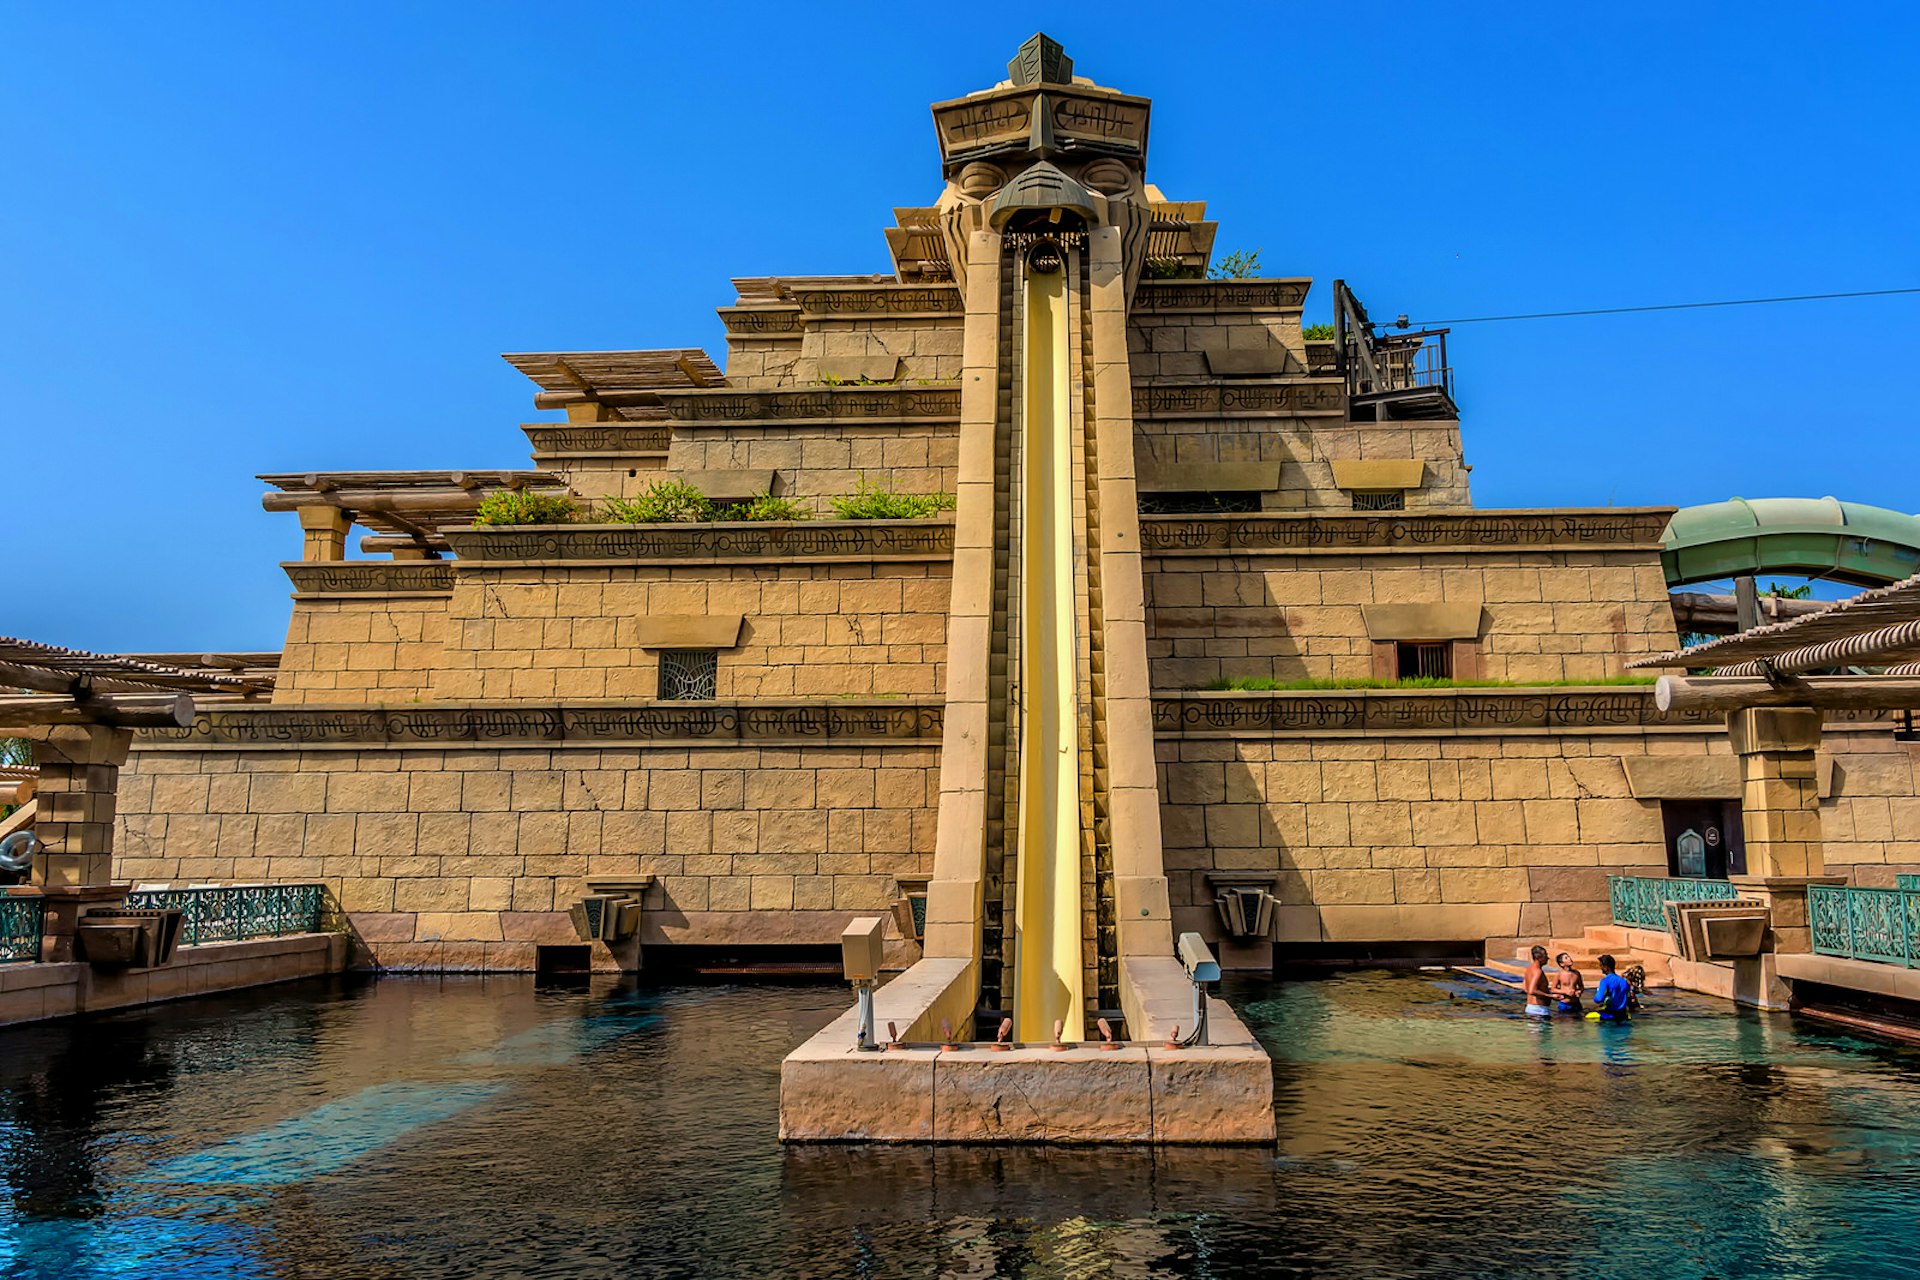 The Aquaventure waterpark of Atlantis the Palm hotel, located on man-made island Palm Jumeirah. The Tower Of Neptune. Image by Kiev.Victor / Shutterstock